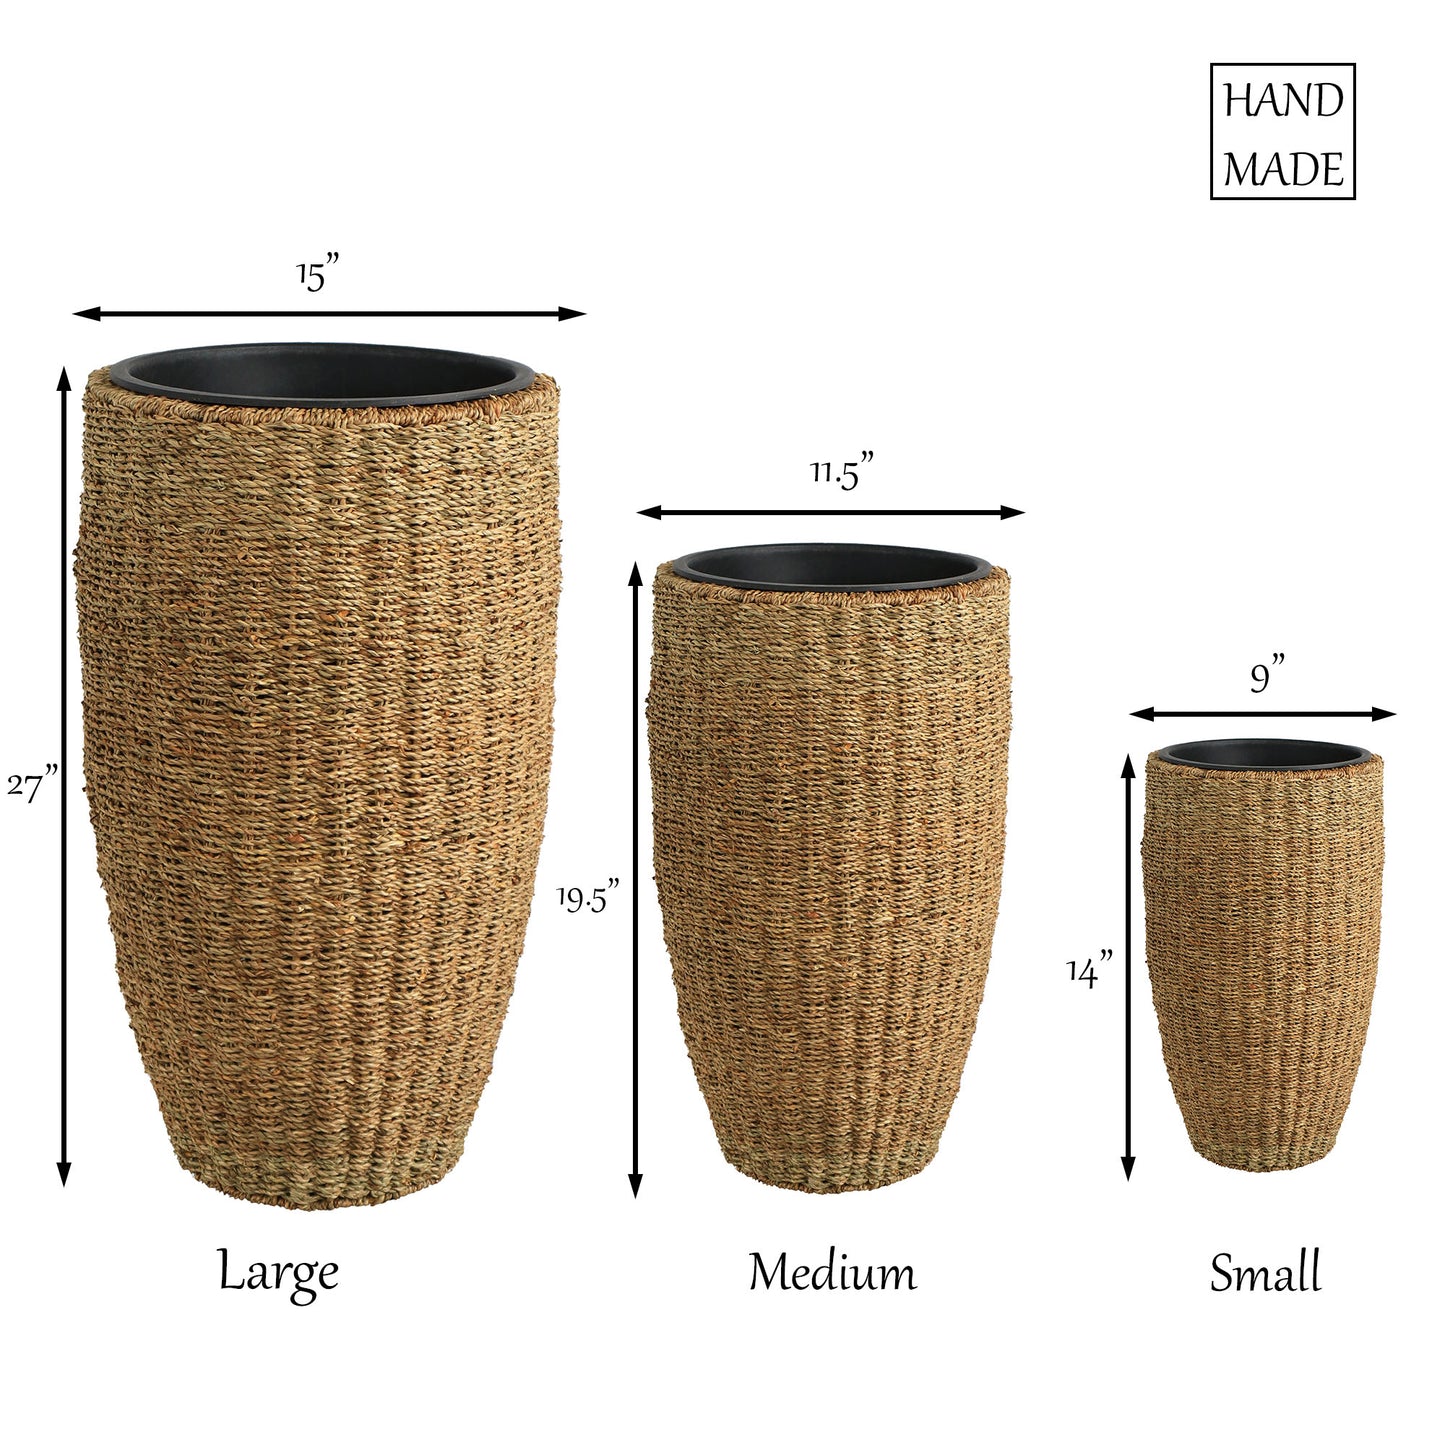 Eden Grace Set of 3 Hand Woven Round Wicker Planters - Made with Eco-Friendly Sustainable Seagrass - Comes with Polyethylene Pot inside